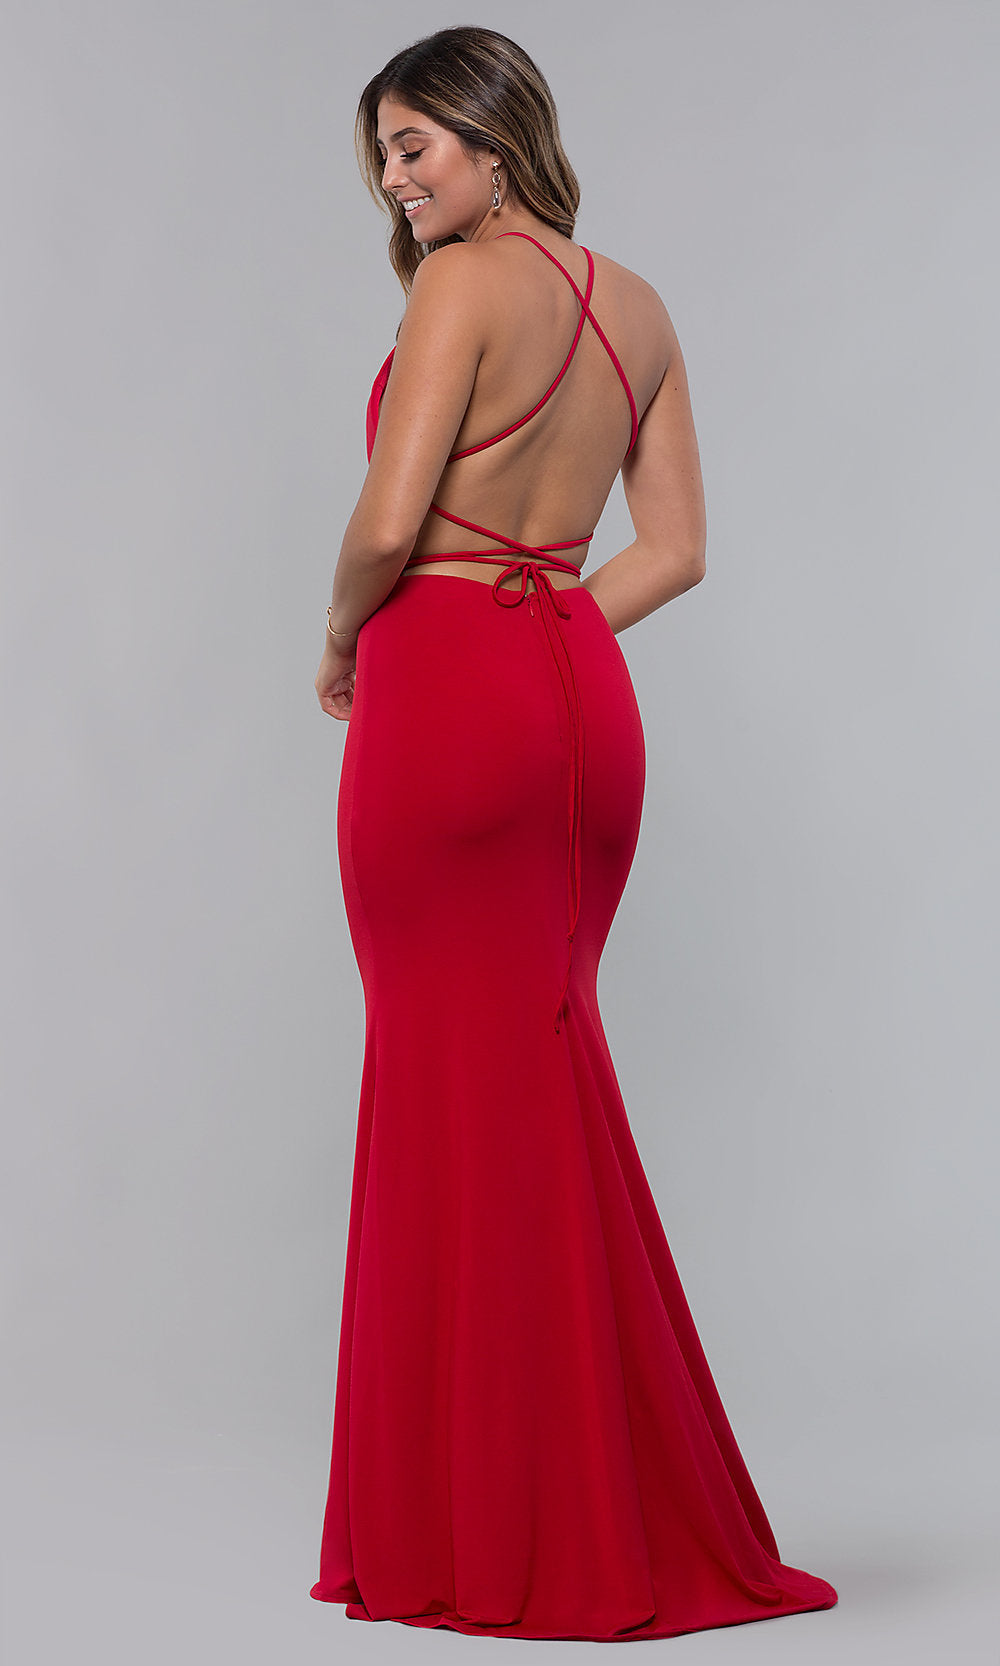  Long Tied-Open-Back Formal Dress with Train